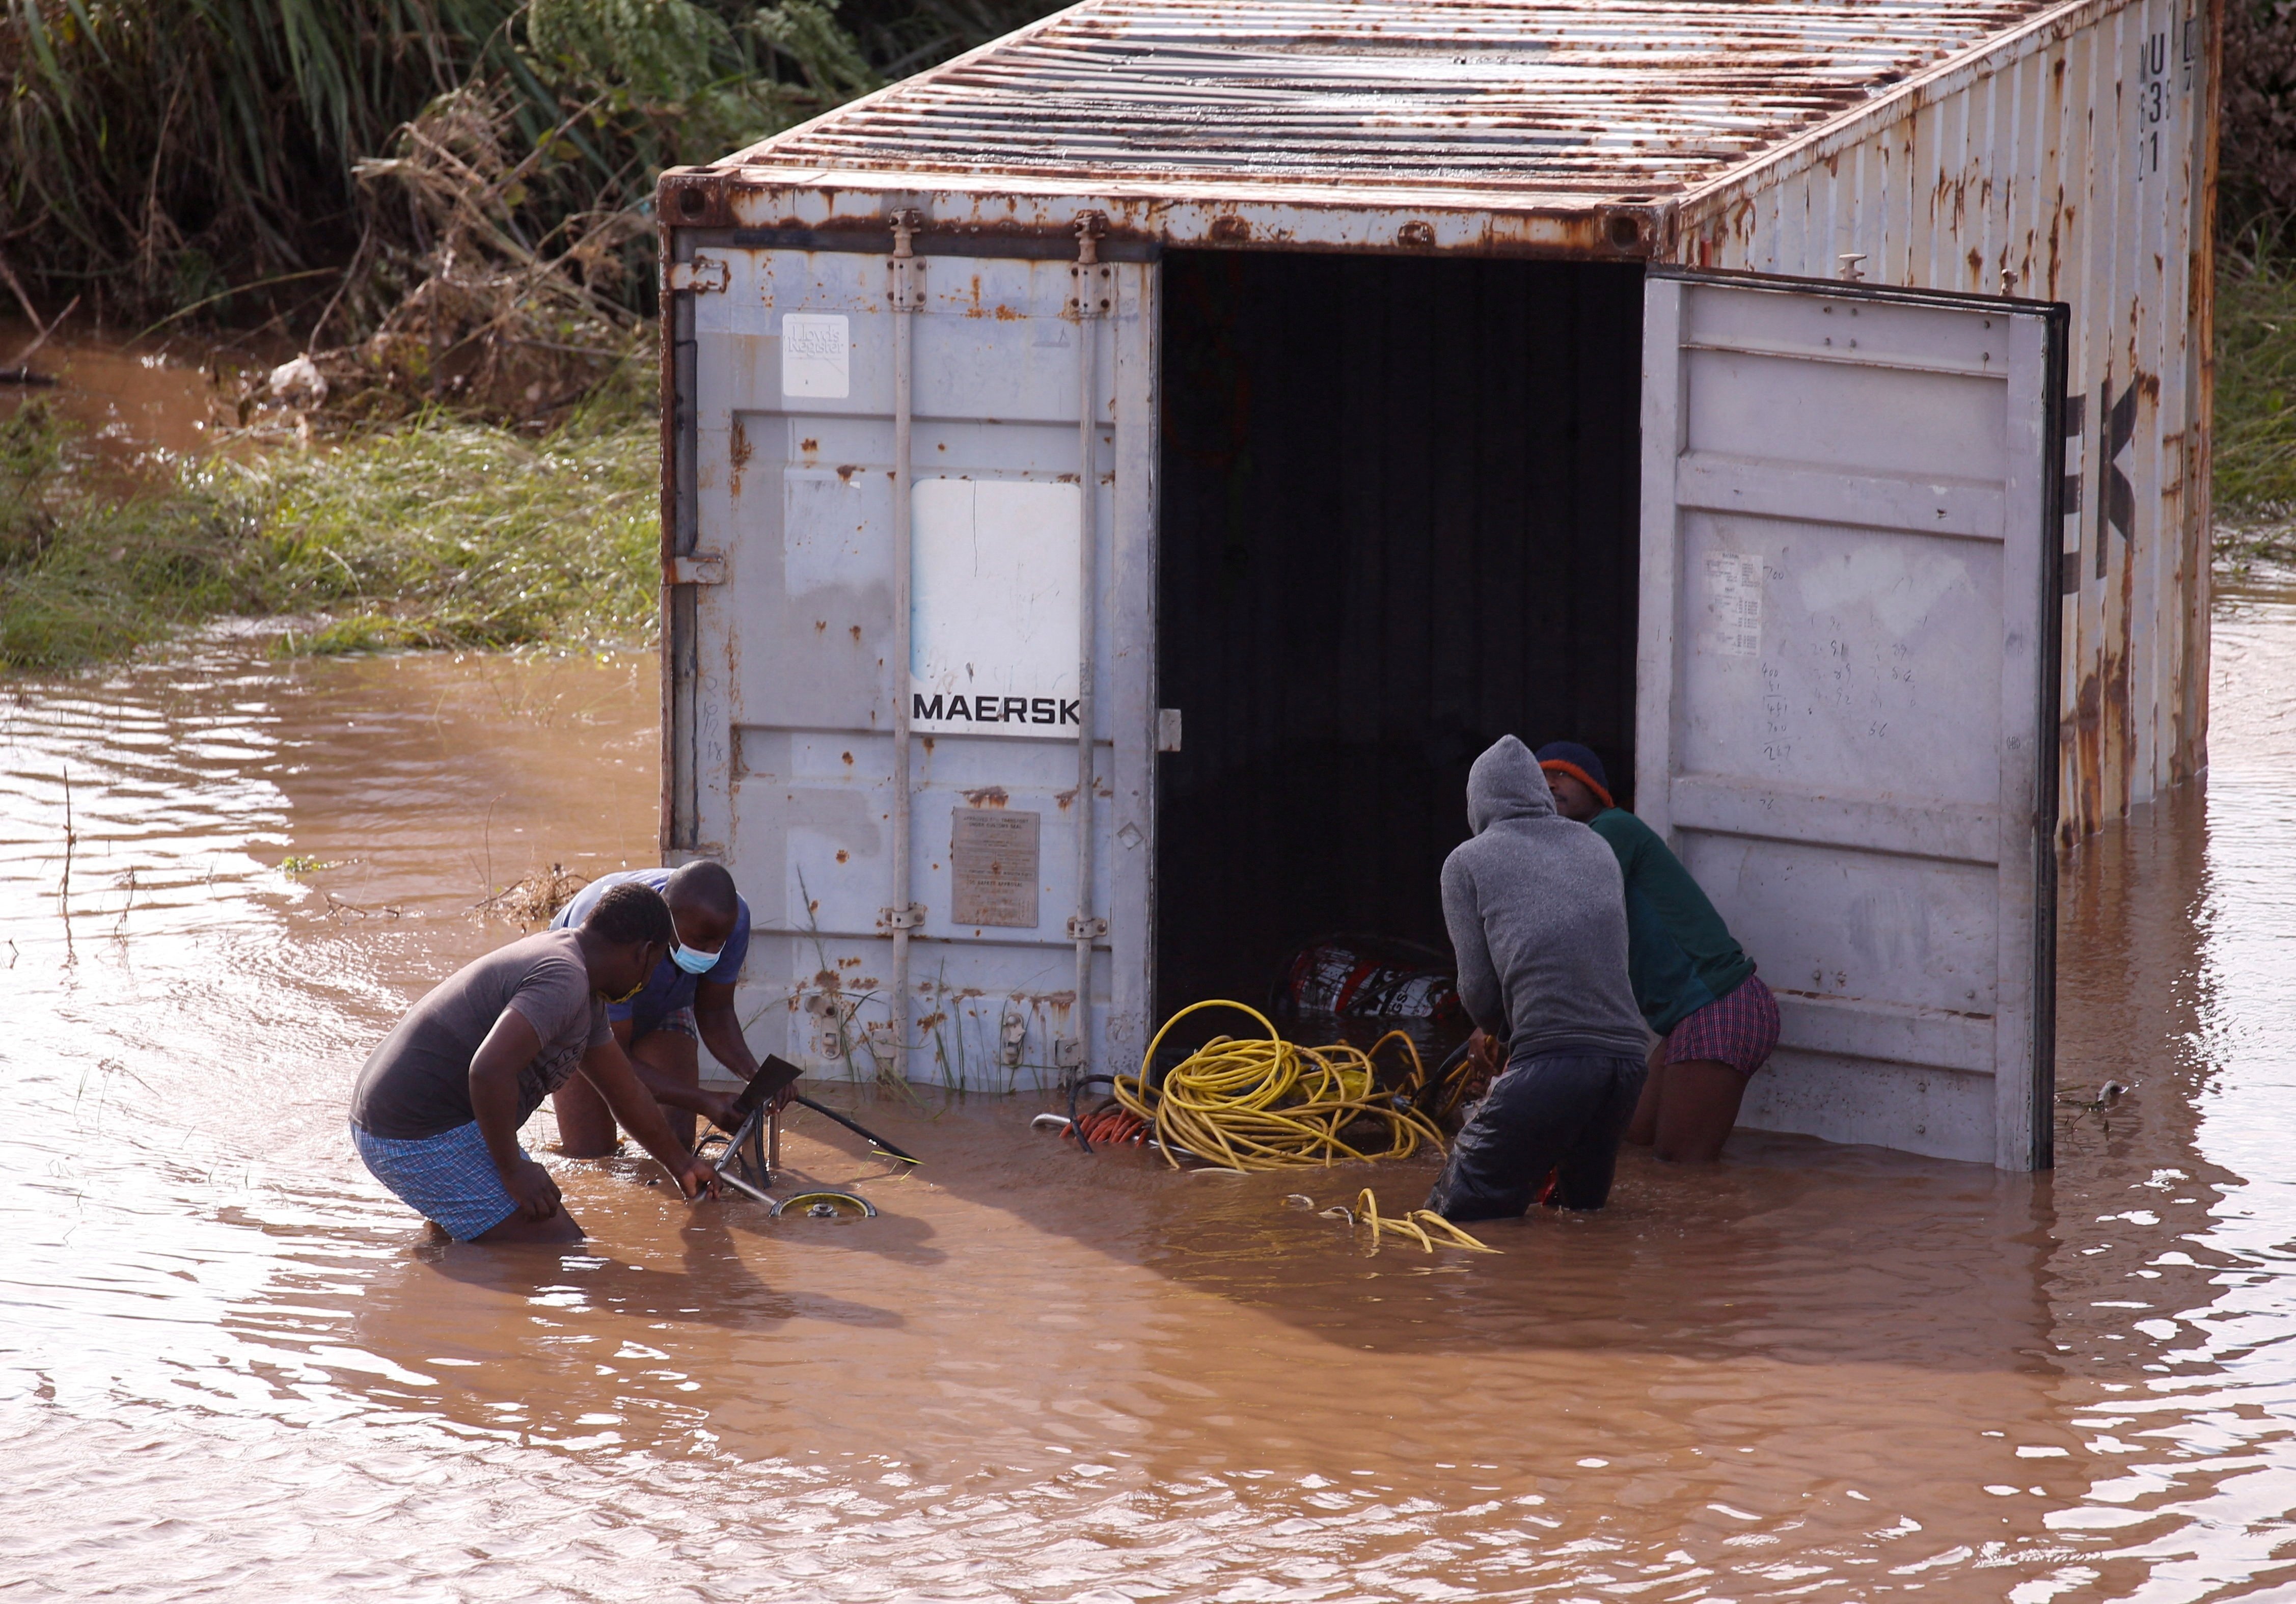 People loot a shipping container, which was washed away after heavy rains caused flooding in Durban, South Africa, April 12, 2022. (REUTERS PHOTO)